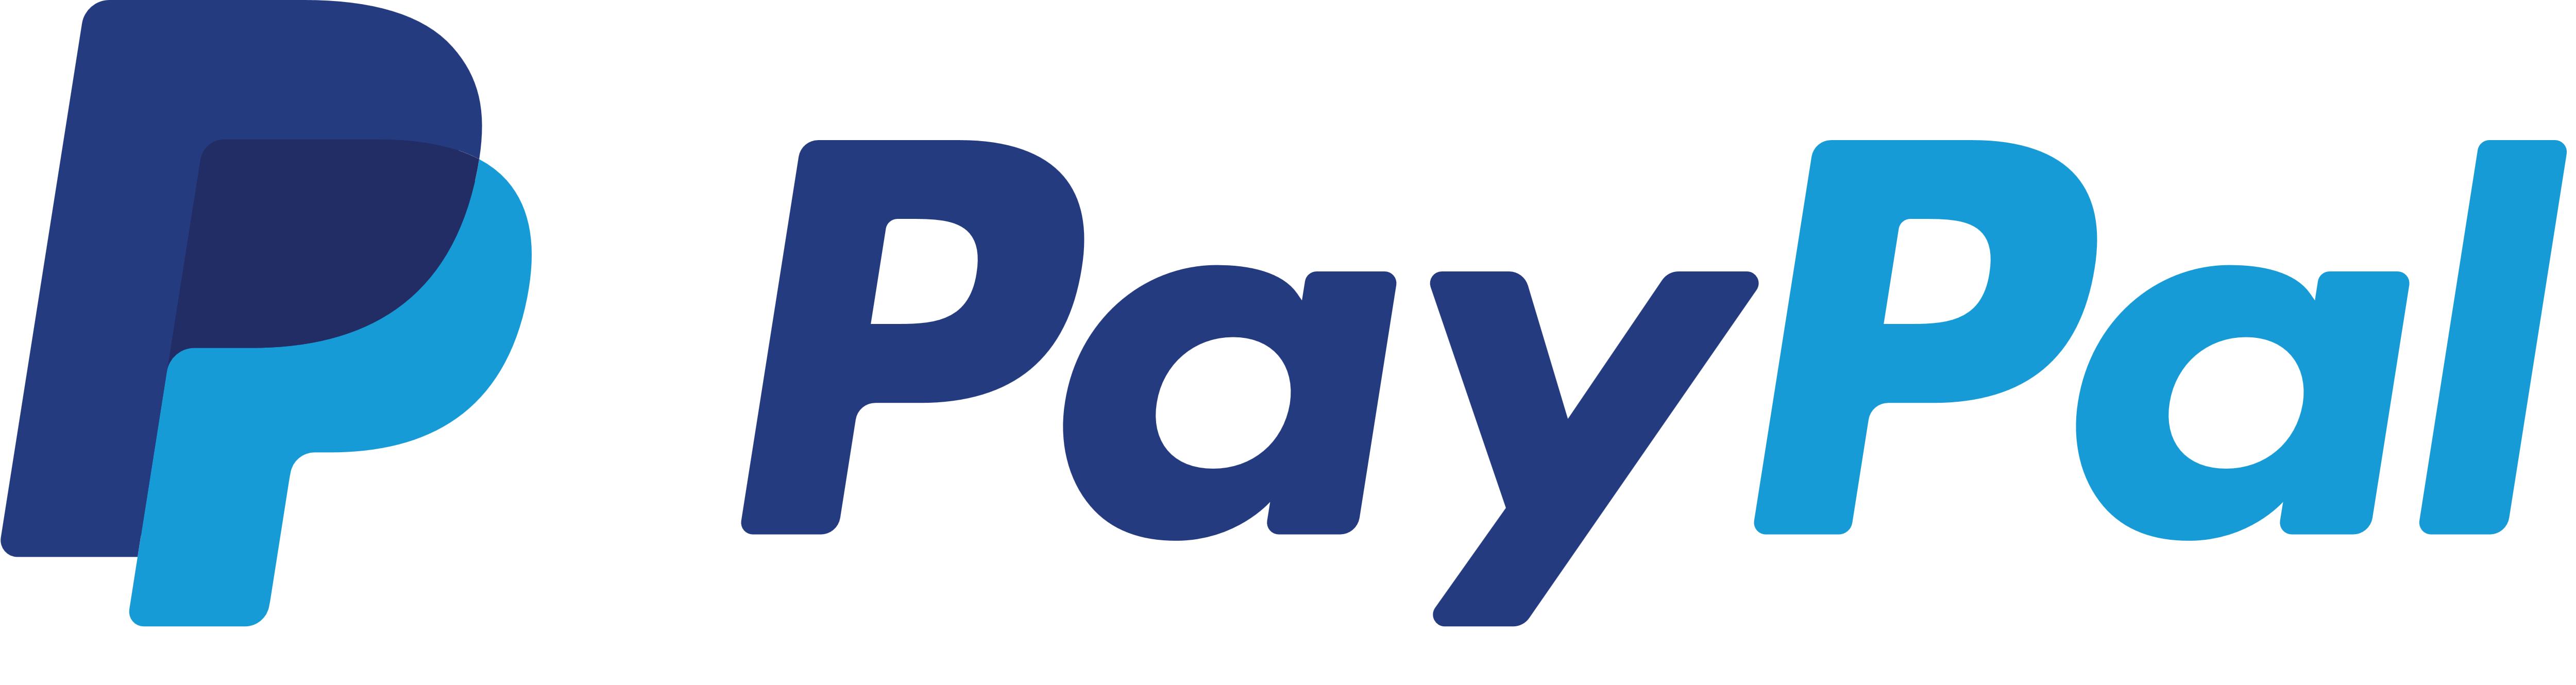 IFMC Institute uses Paypal payments for International Payments